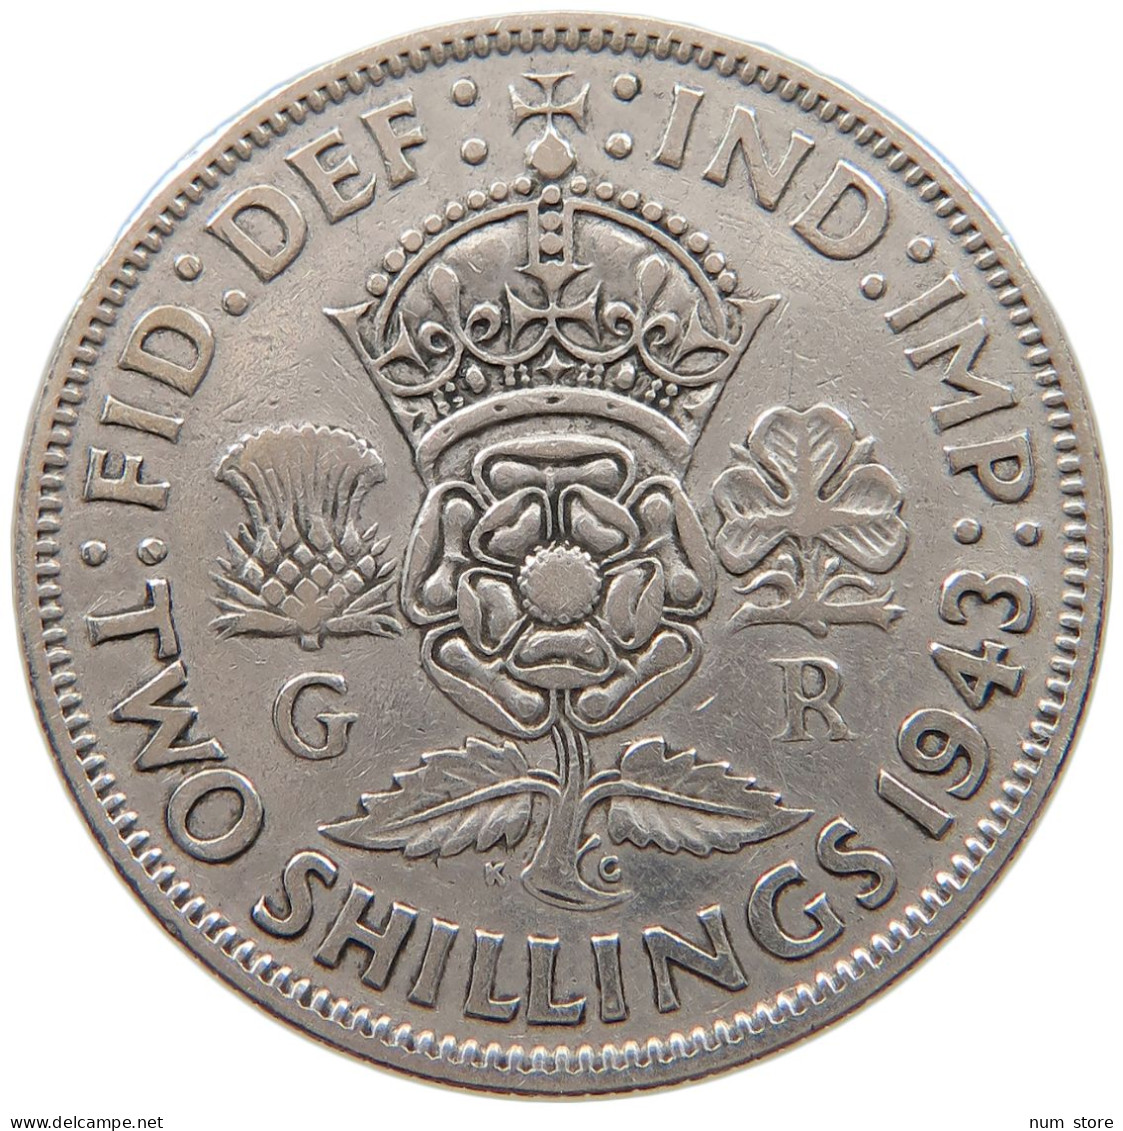 GREAT BRITAIN TWO SHILLINGS 1943 George VI. (1936-1952) #a057 0603 - J. 1 Florin / 2 Shillings